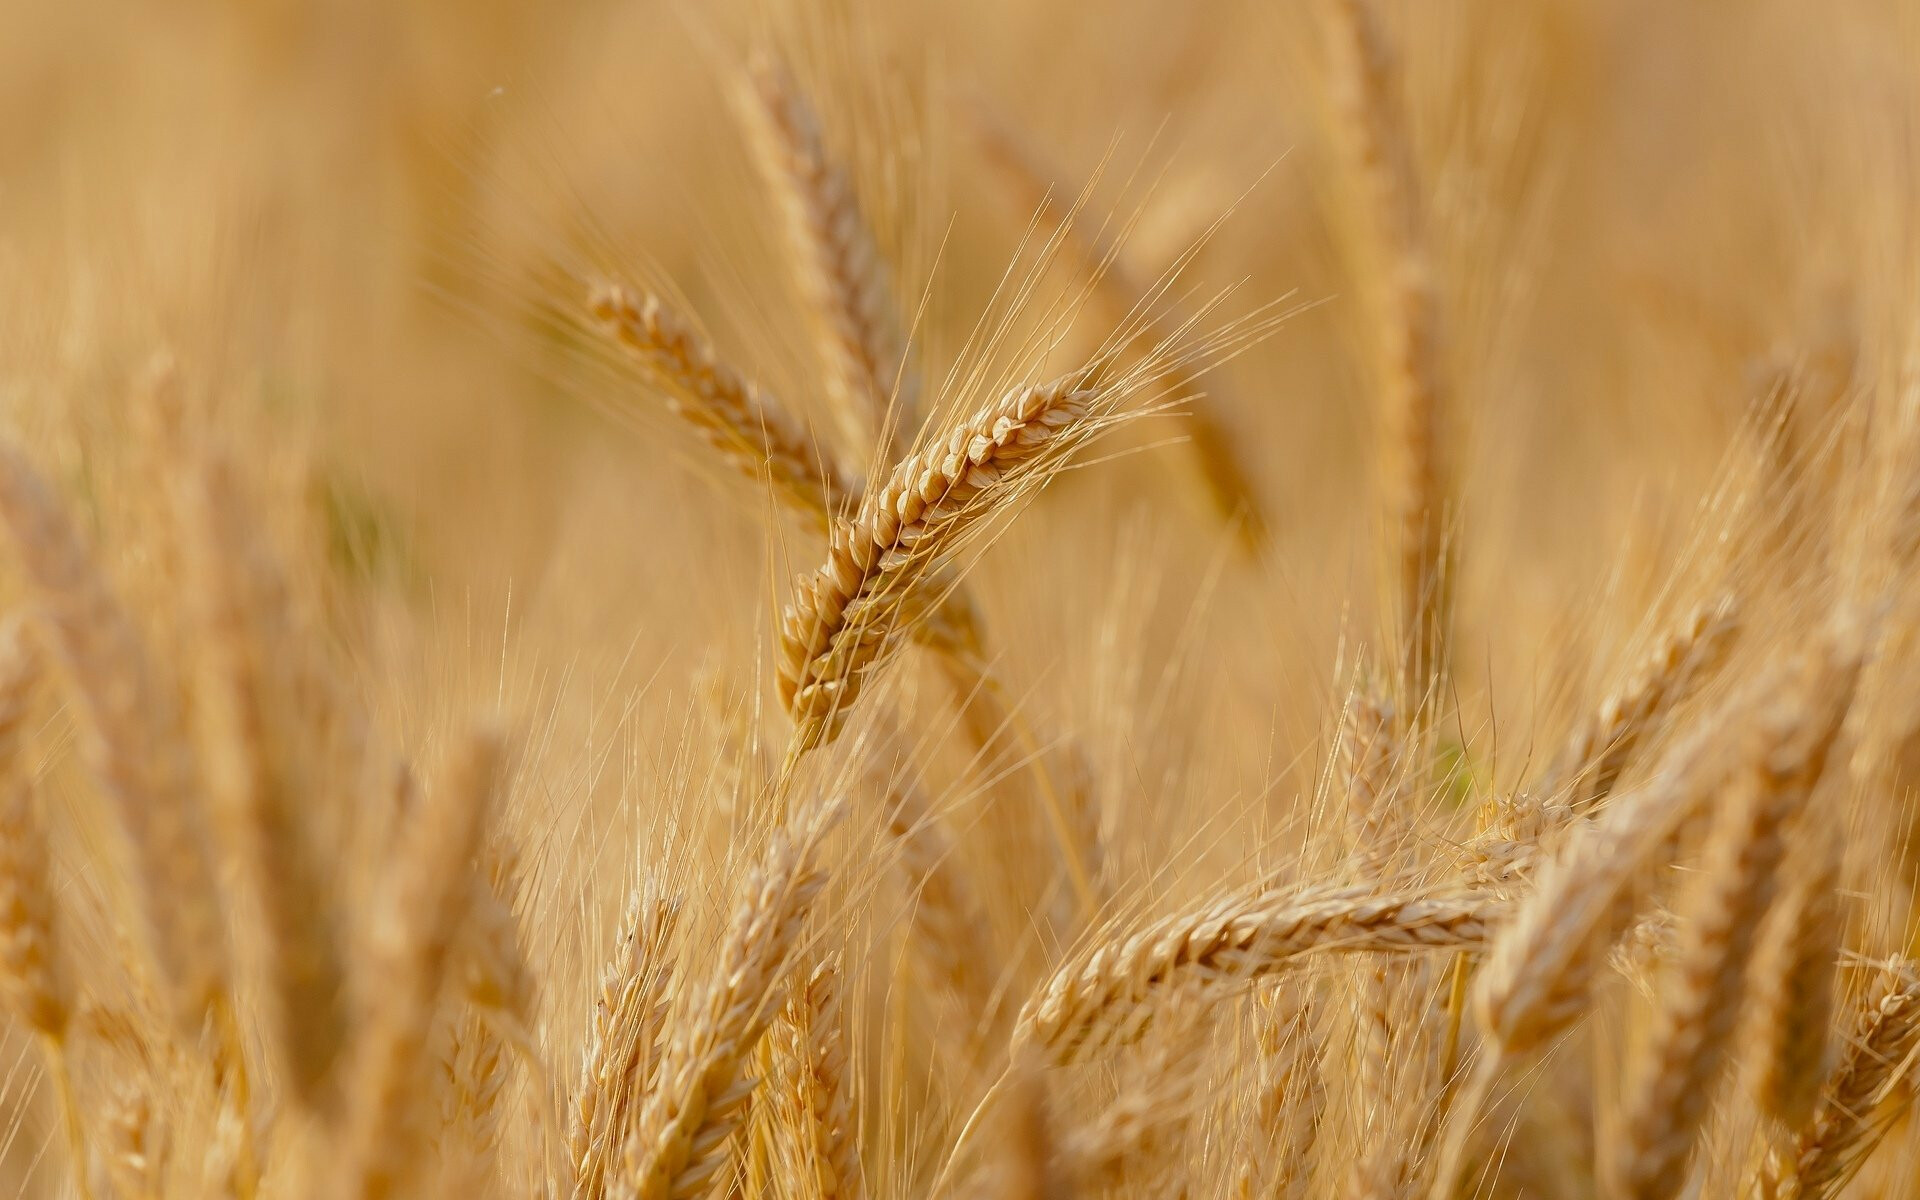 close-up-wheat-rye-the-field-ears-spikes-spike-background-wallpaper-widescreen-full-screen-widescreen-hd-wallpapers-background-wallpaper-widescreen-fullscreen-widescreen